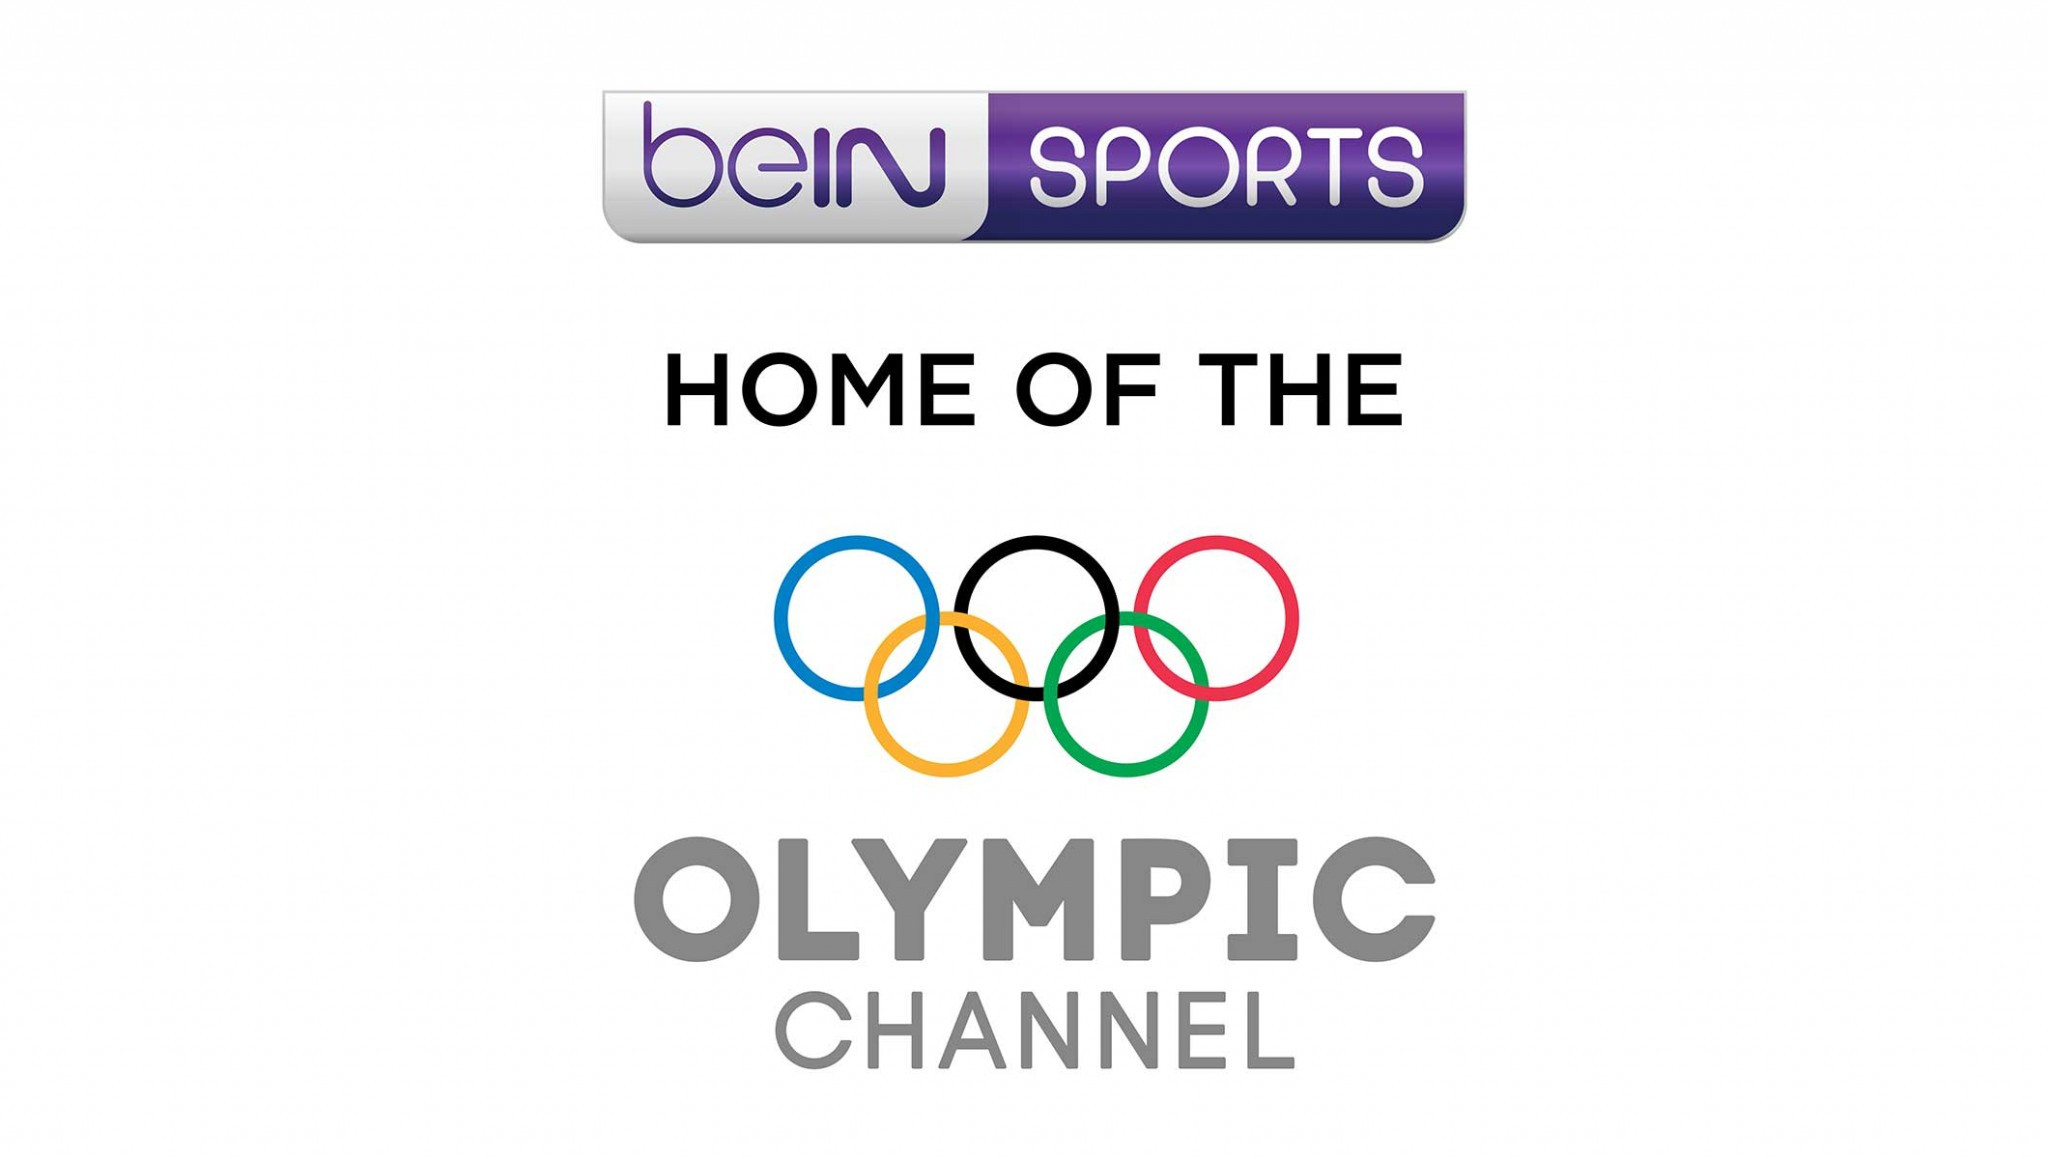 Olympic Channel to be showcased in Middle East and North Africa after beIN sports deal